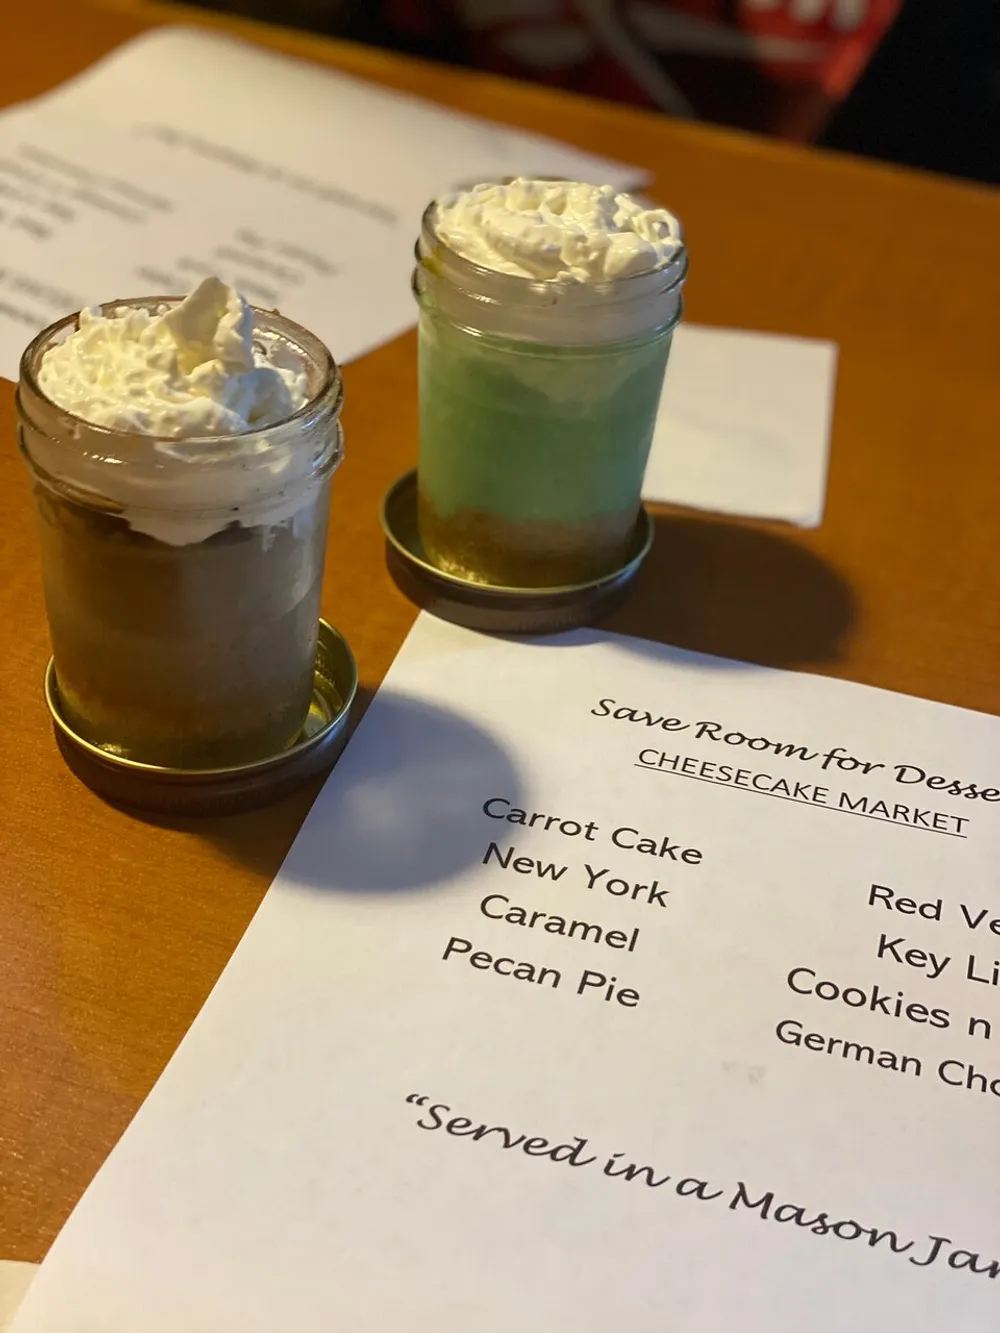 The image displays two mason jars filled with layered desserts topped with whipped cream situated in front of a dessert menu which indicates they are part of a Cheesecake Market selection